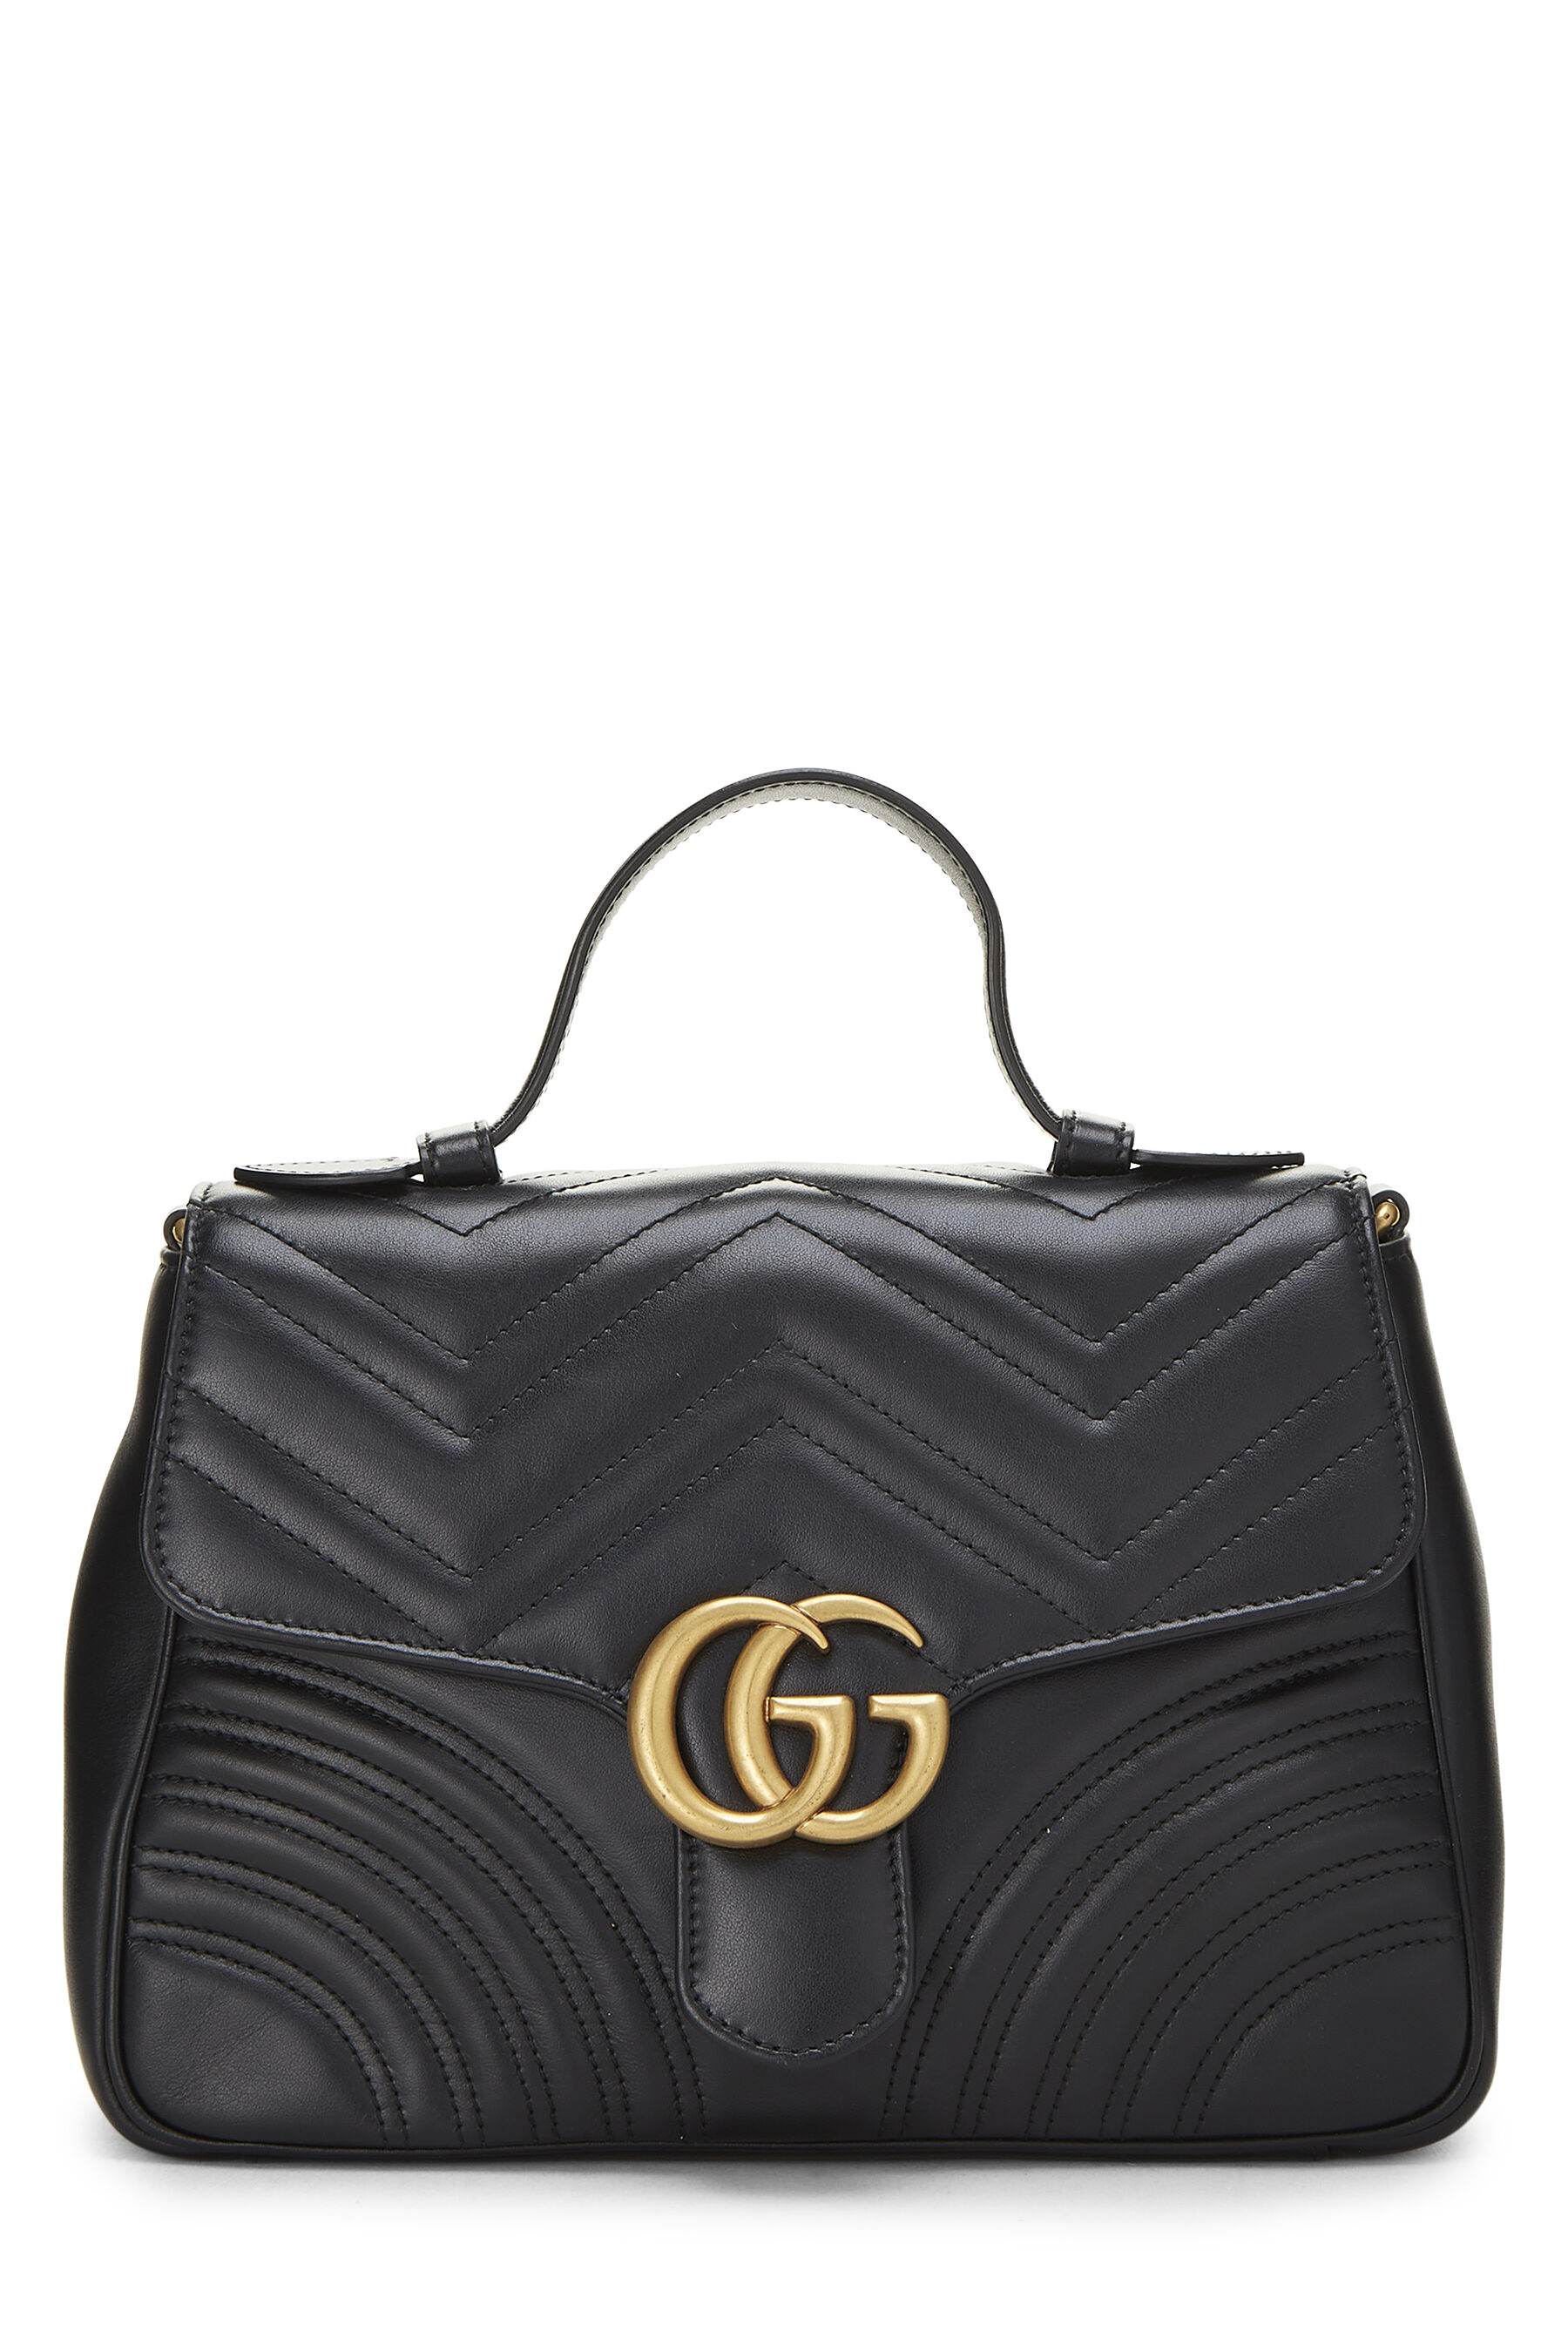 Black Leather GG Marmont Top Handle Shoulder Bag Small